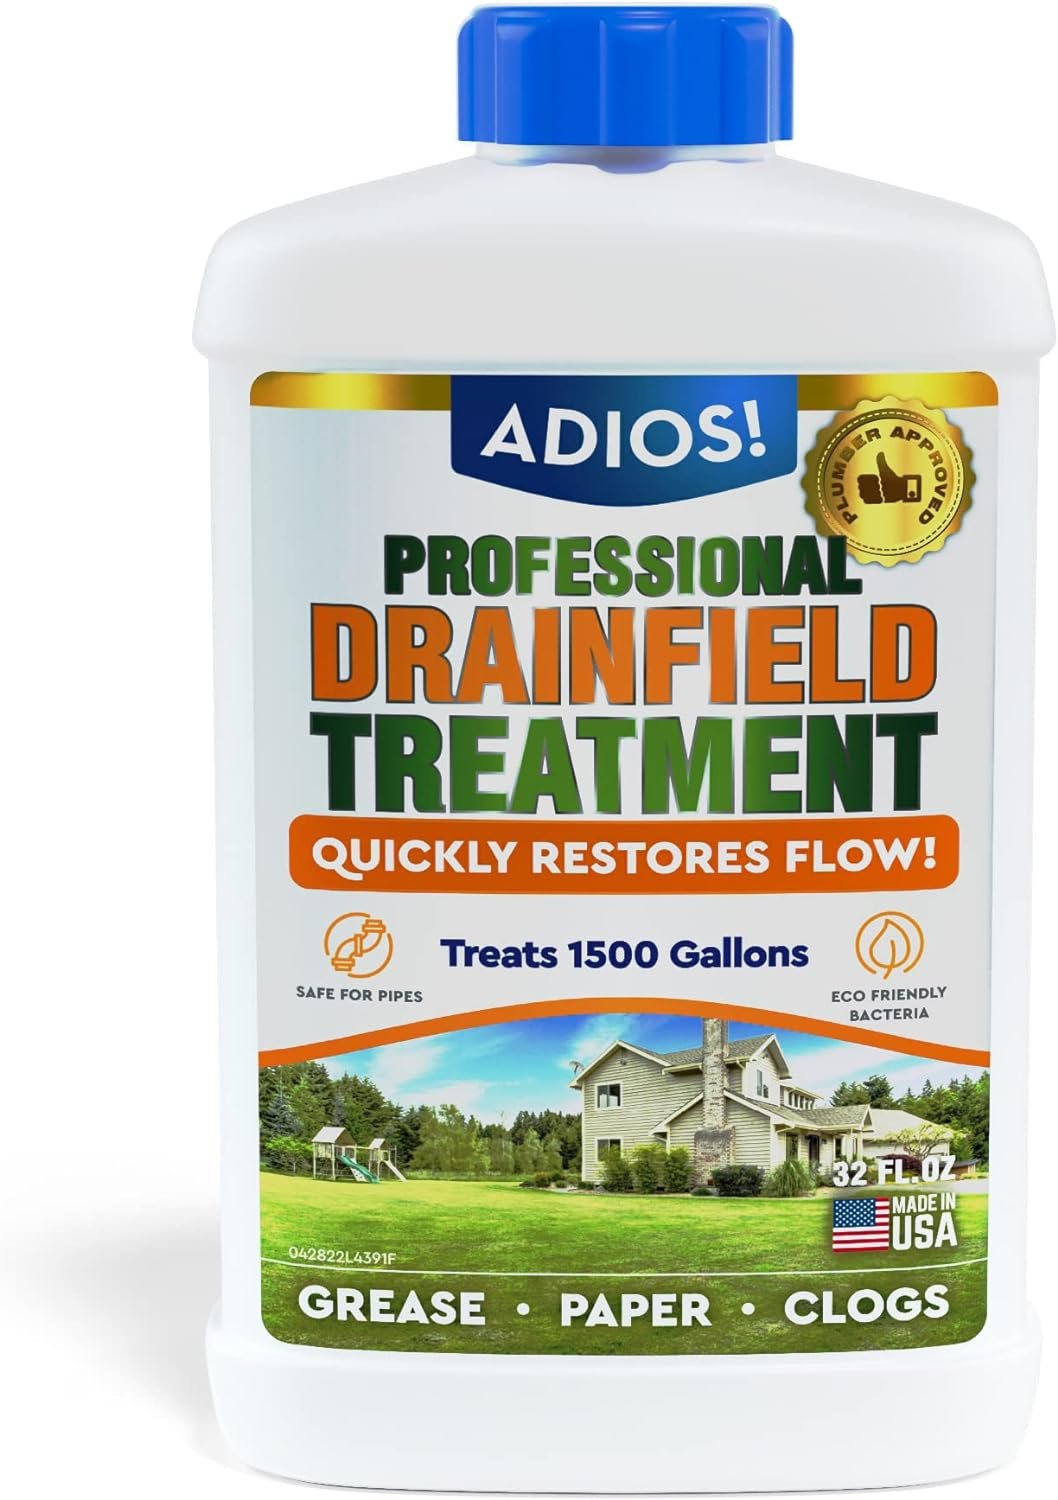 Adios! Drain Field Treatment and Cleaner for Leach Fields, Safely Opens and Restores Drainfields - 32oz